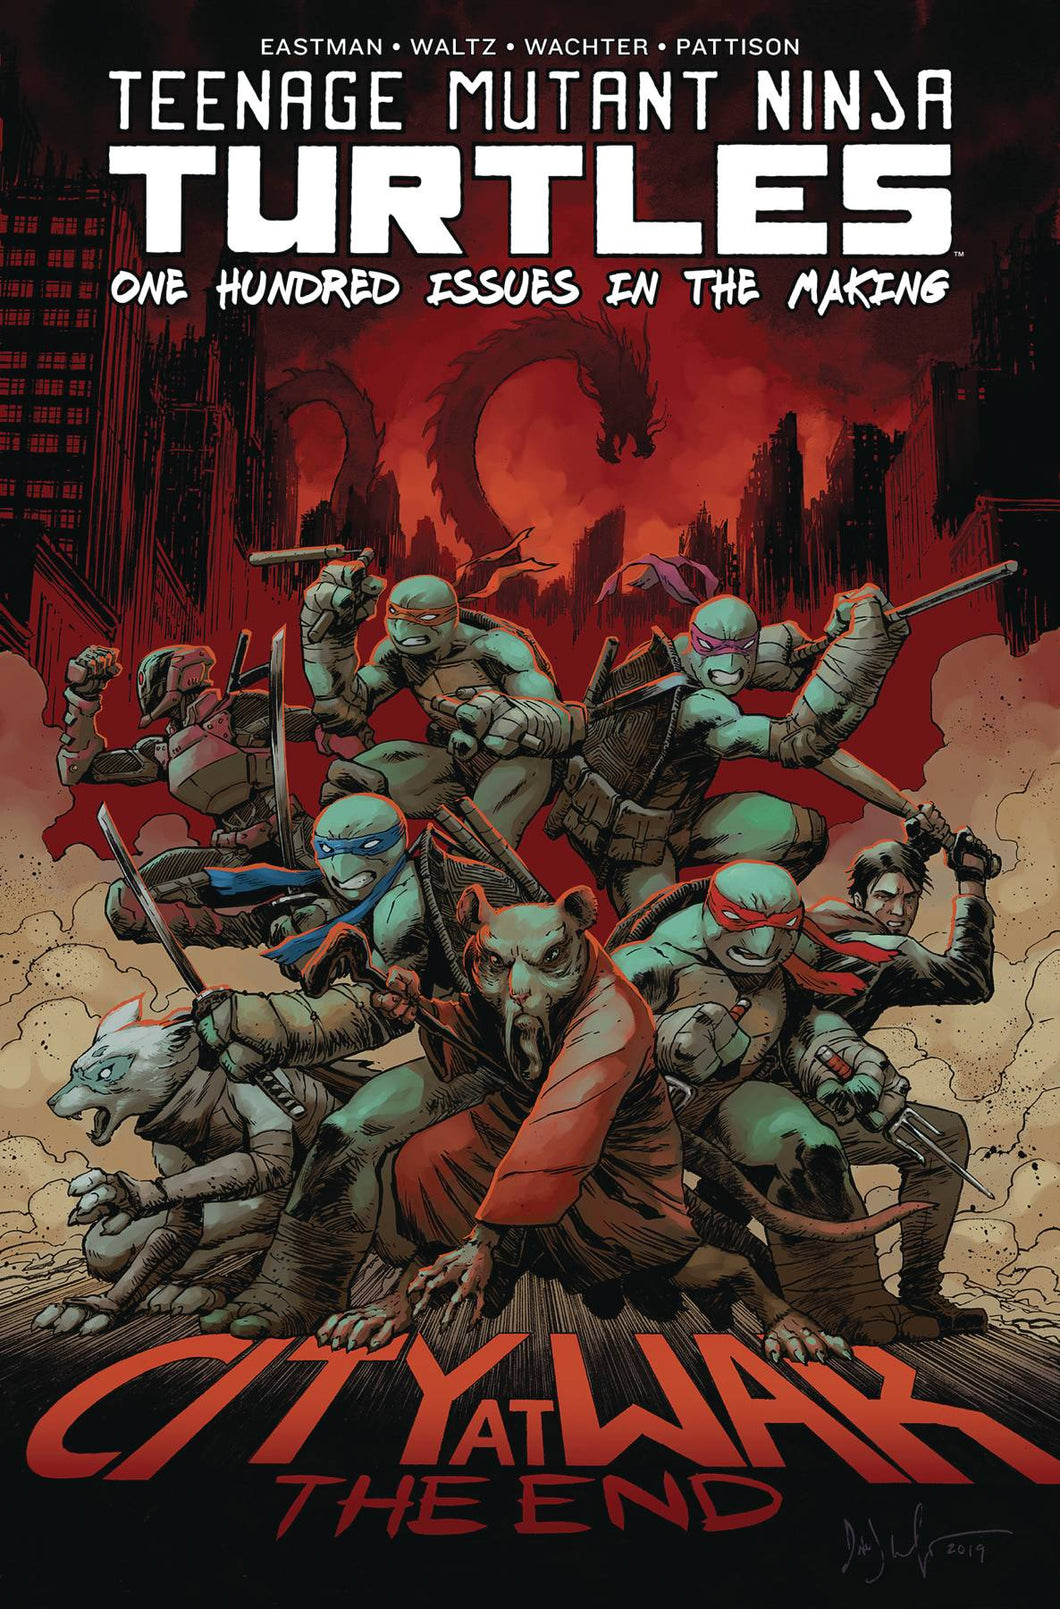 TMNT ONGOING #100 DLX HC (C: 0-1-2)